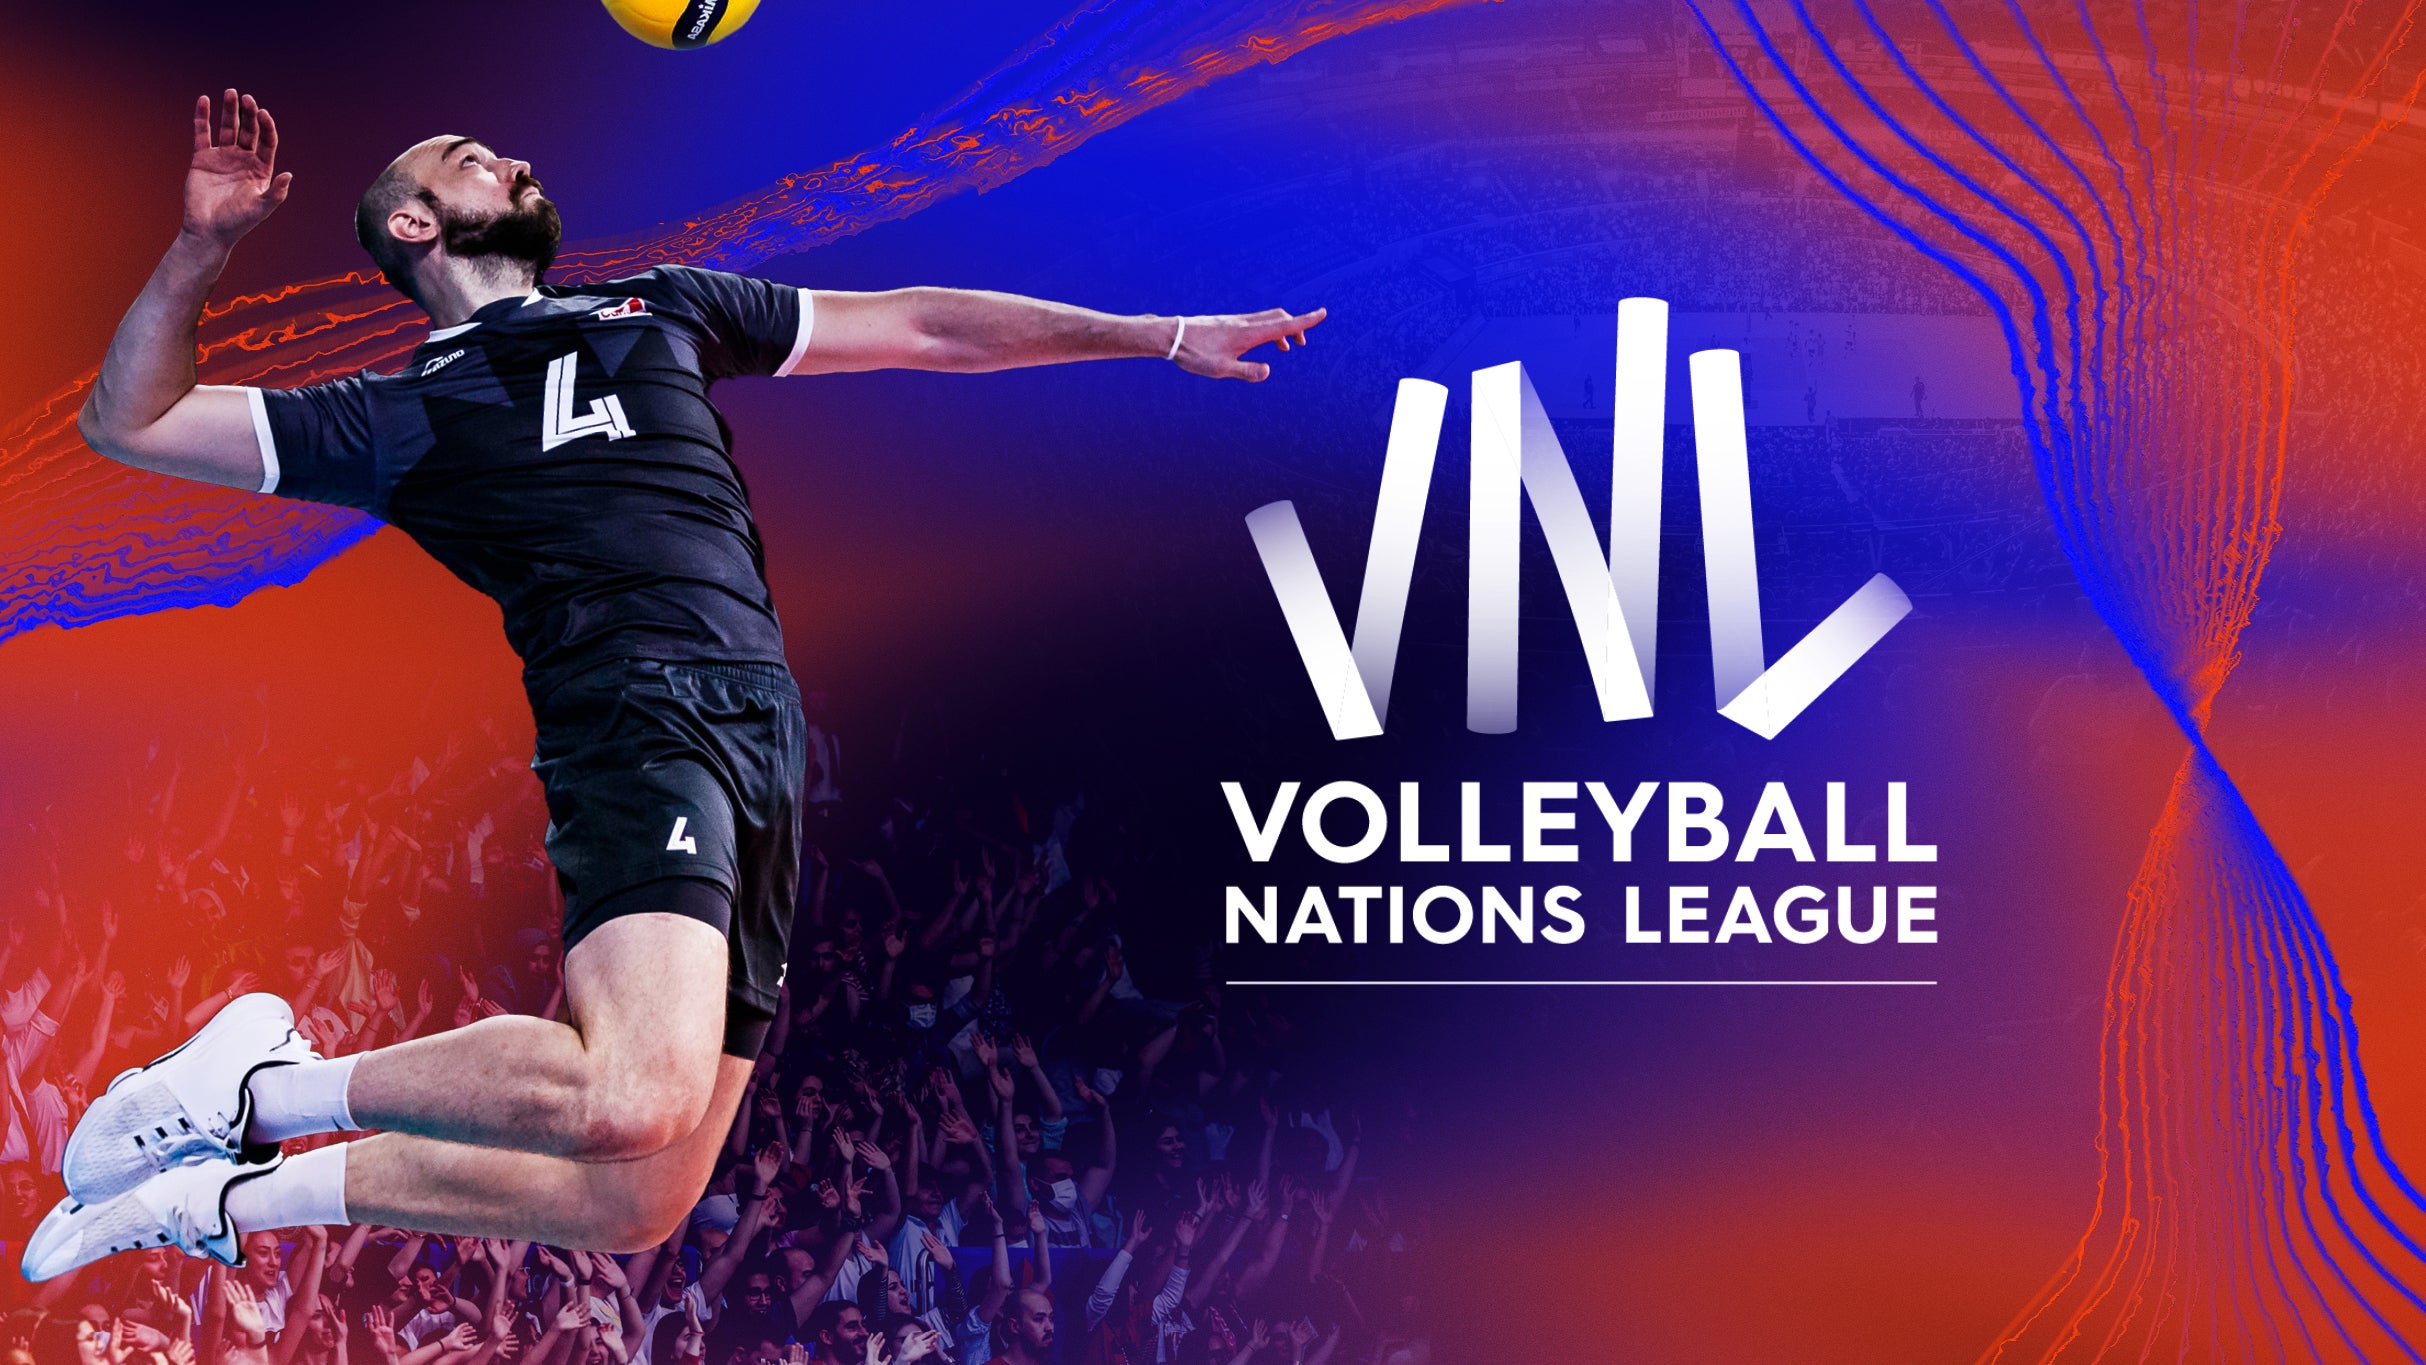 Volleyball Nations League - June 11 in Ottawa promo photo for TD Place Insider presale offer code